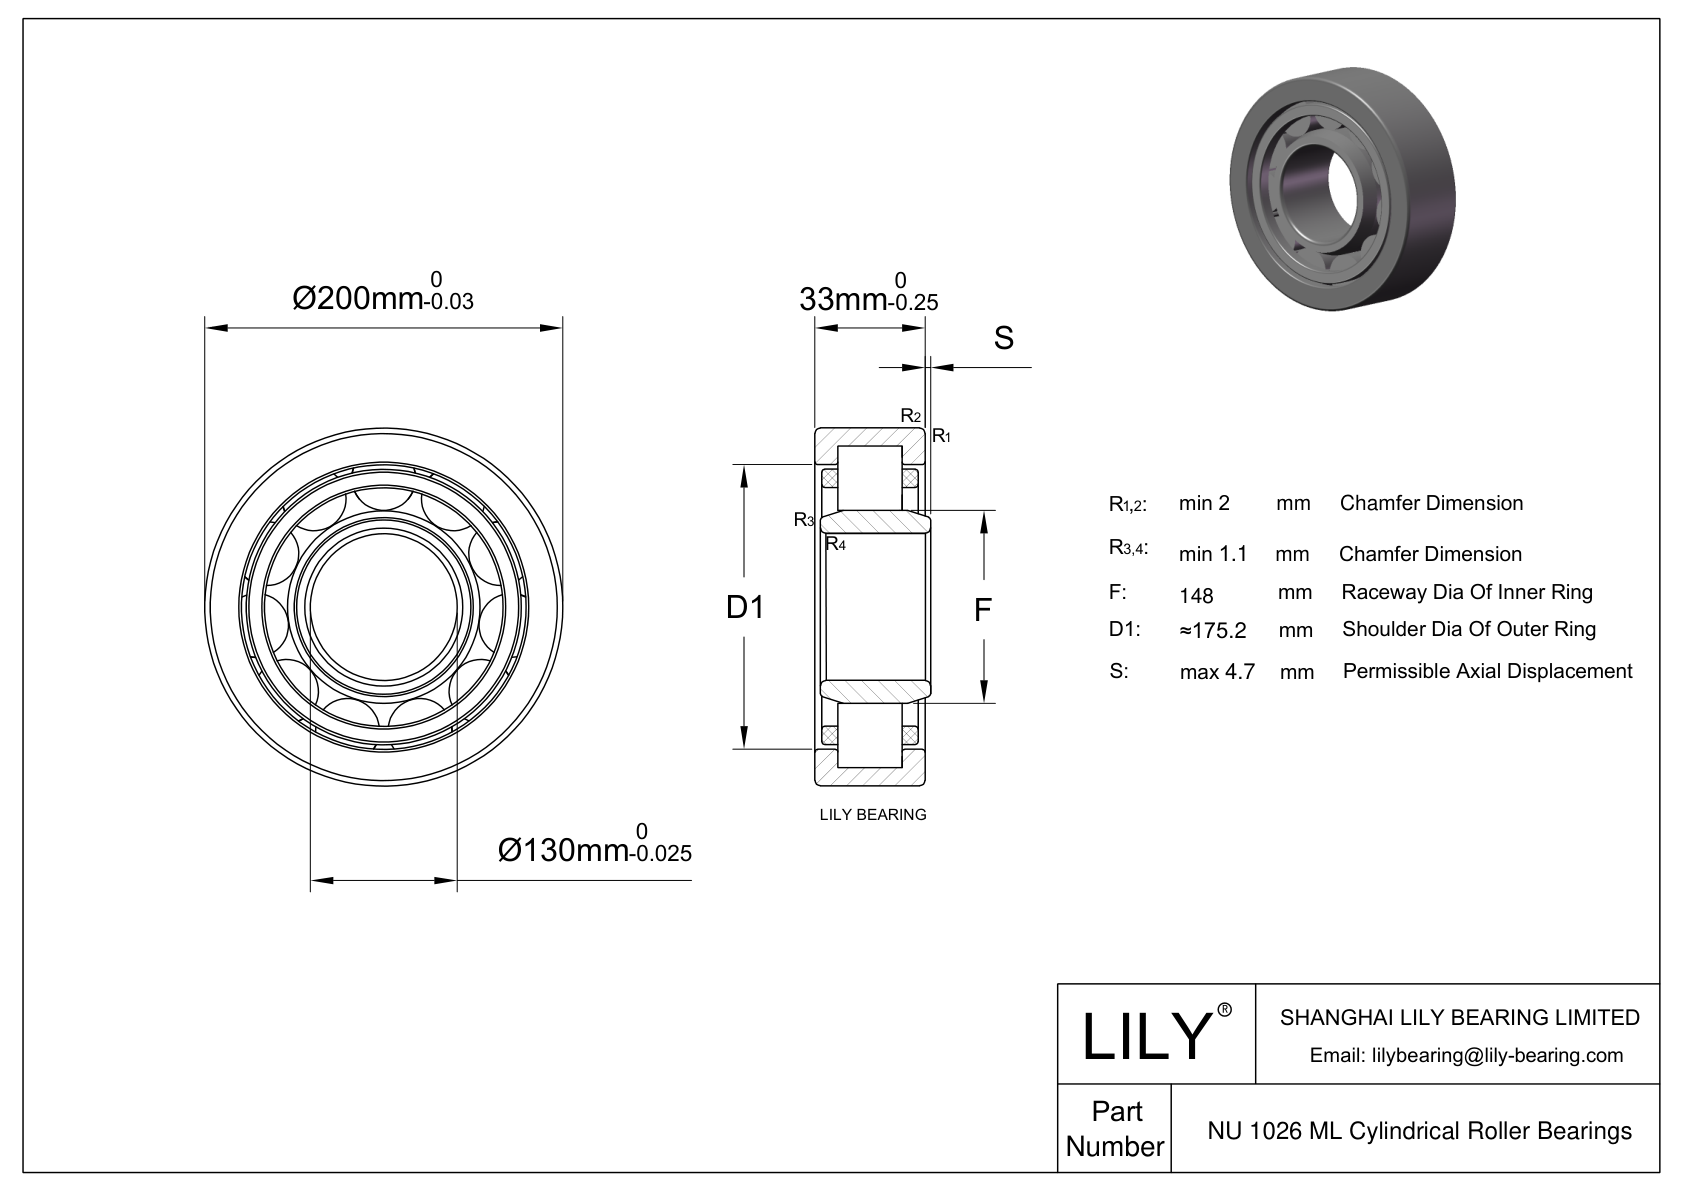 NU 1026 M/C3VL2071 Ceramic Coated Cylindrical Roller Bearings cad drawing